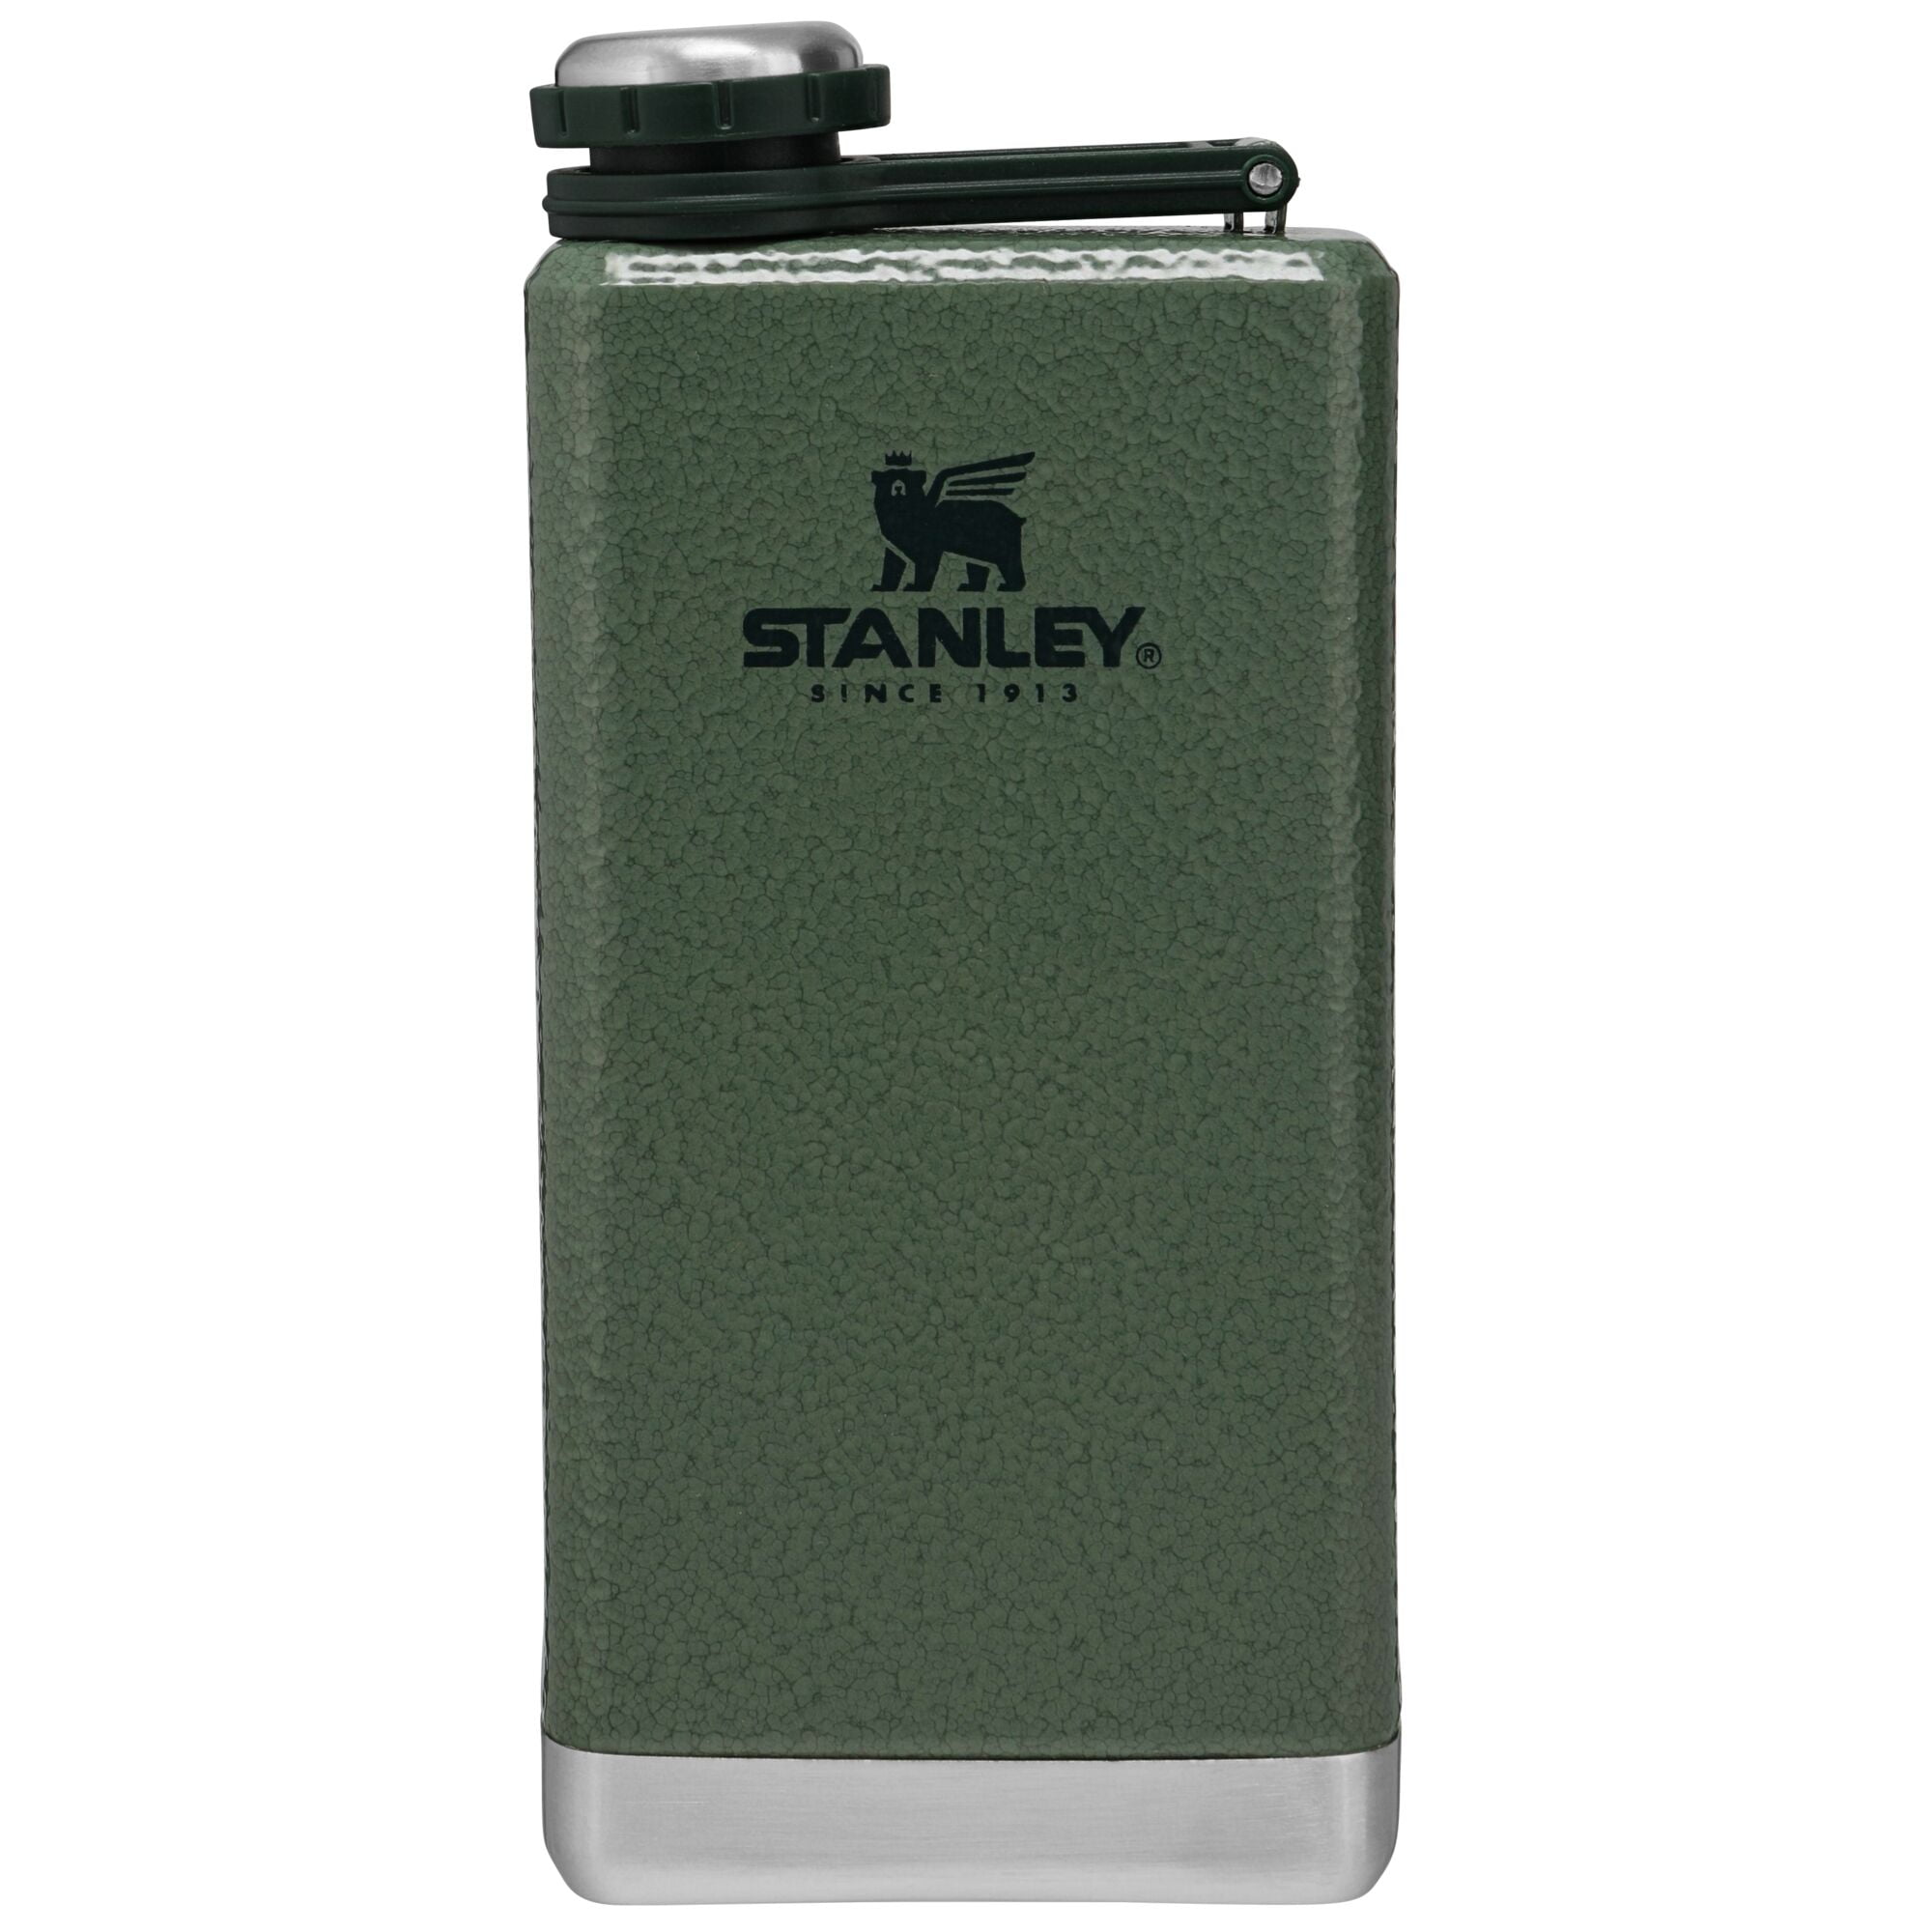 Stanley - The Adventure #Flask + Shot Glass Set = a celebration wherever  you are. Check out our selection of flasks for your next toast:   Built for #Cheers Built for #GoodTimes #